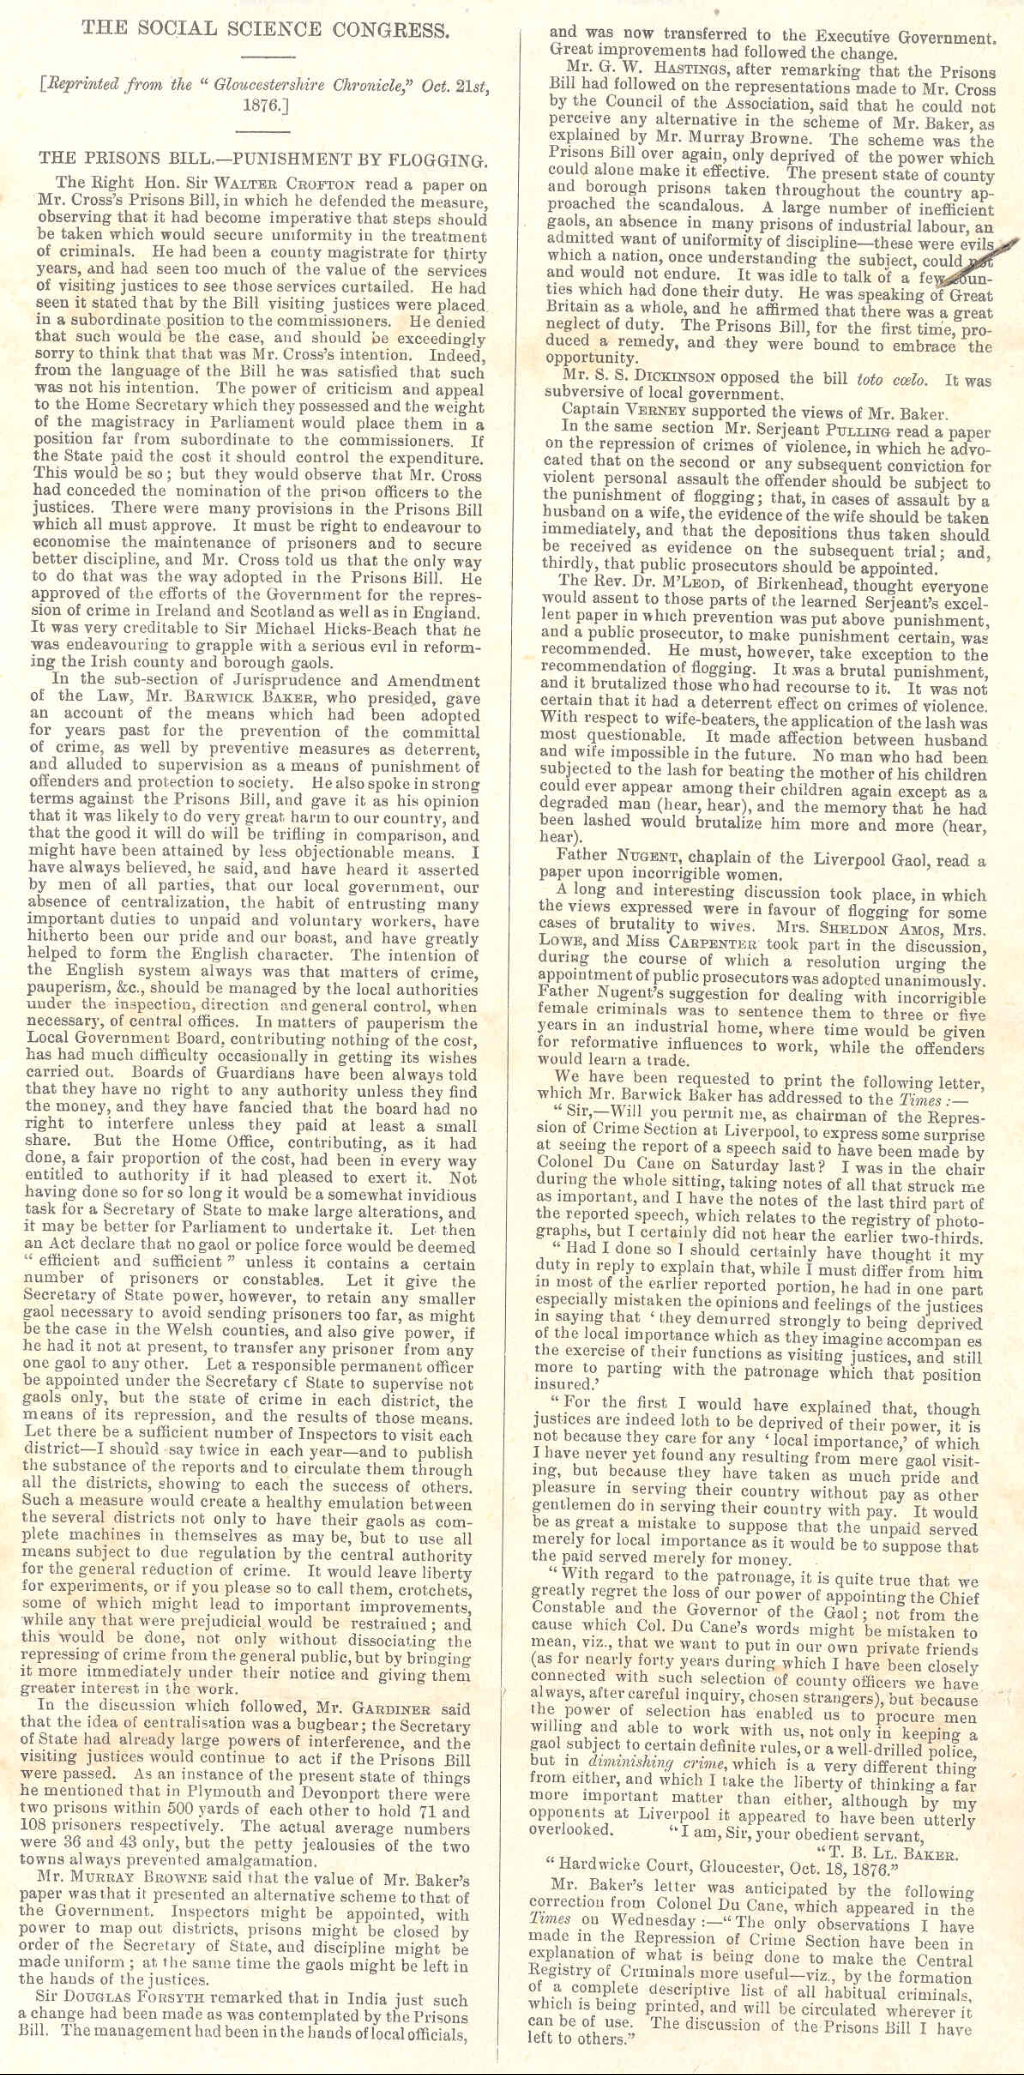 Report on the Social Science Congress, 1876